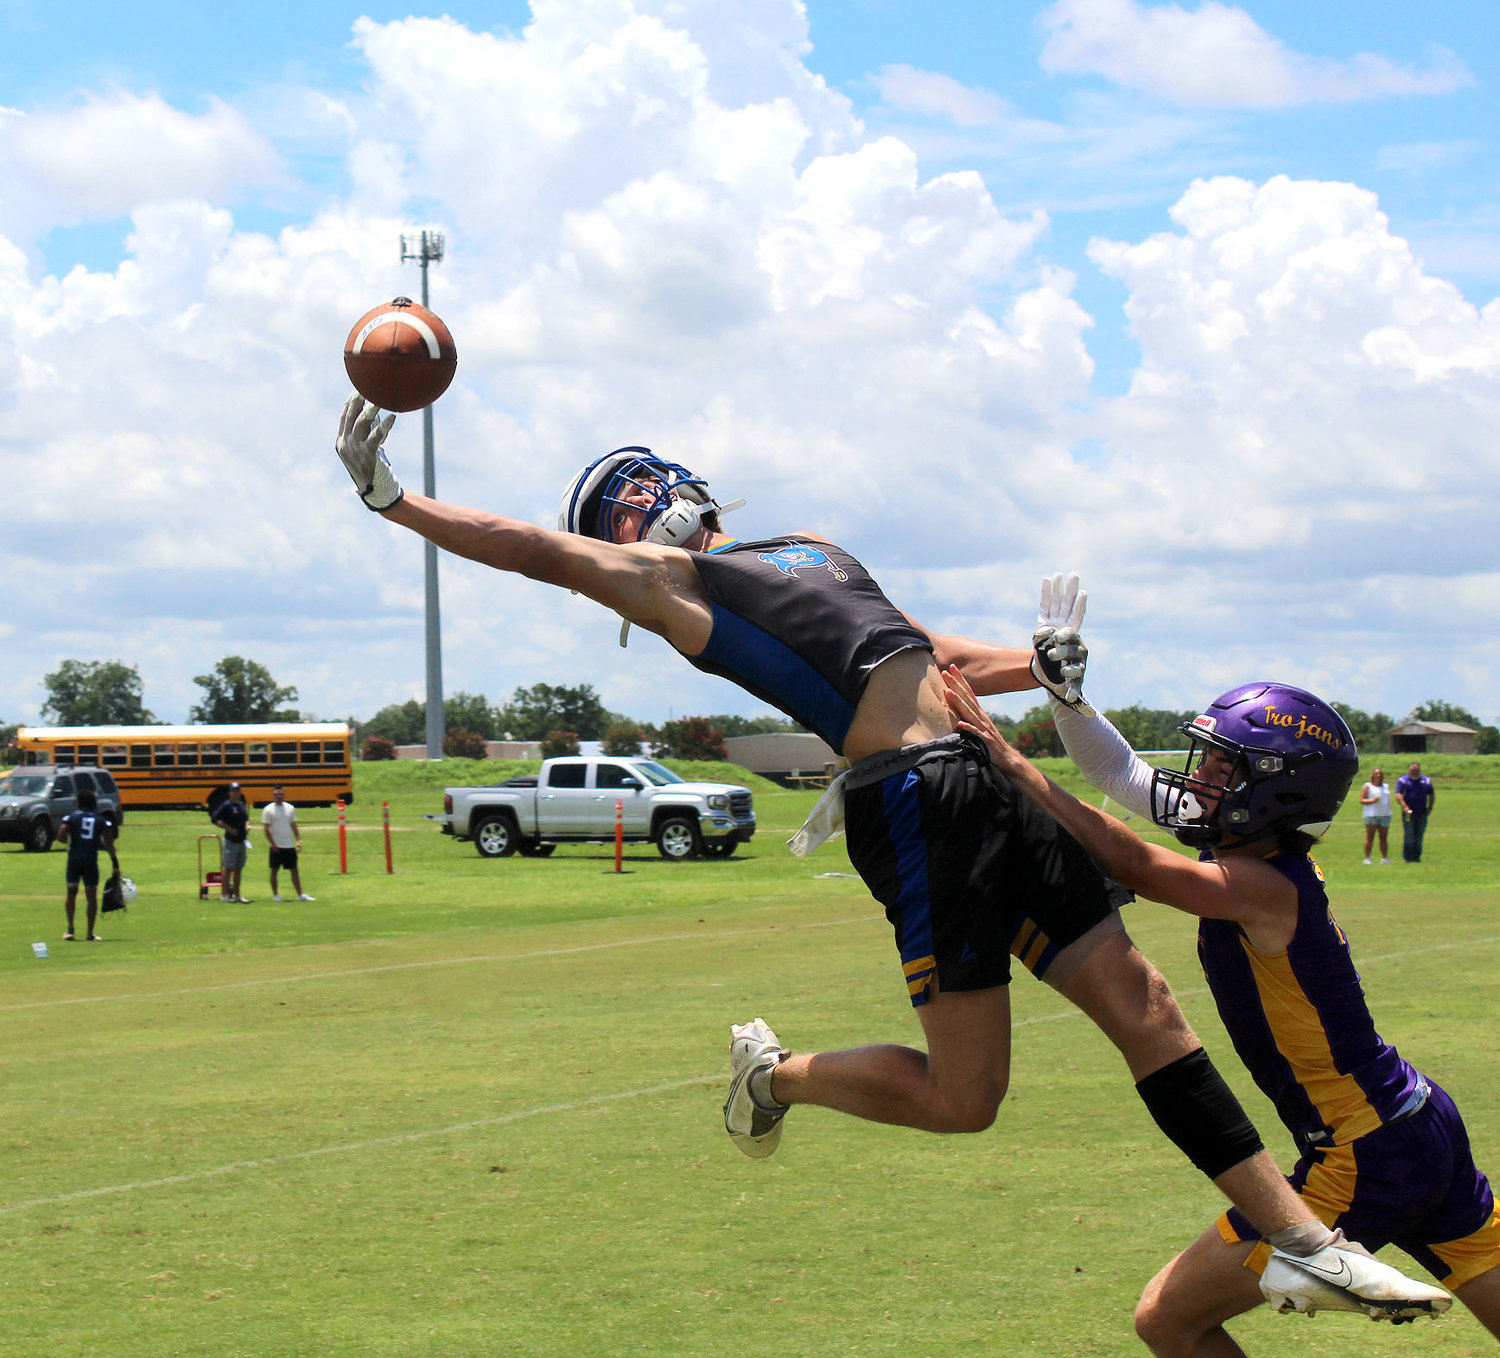 Fairhope senior Ben Moseley reaches out to try and haul in a pass attempt from Caden Creel during the Pirates’ pool-play game against the host Daphne Trojans at the Jubilee City 7-on-7 Tournament at the Al Trione Sports Complex Thursday, July 14.